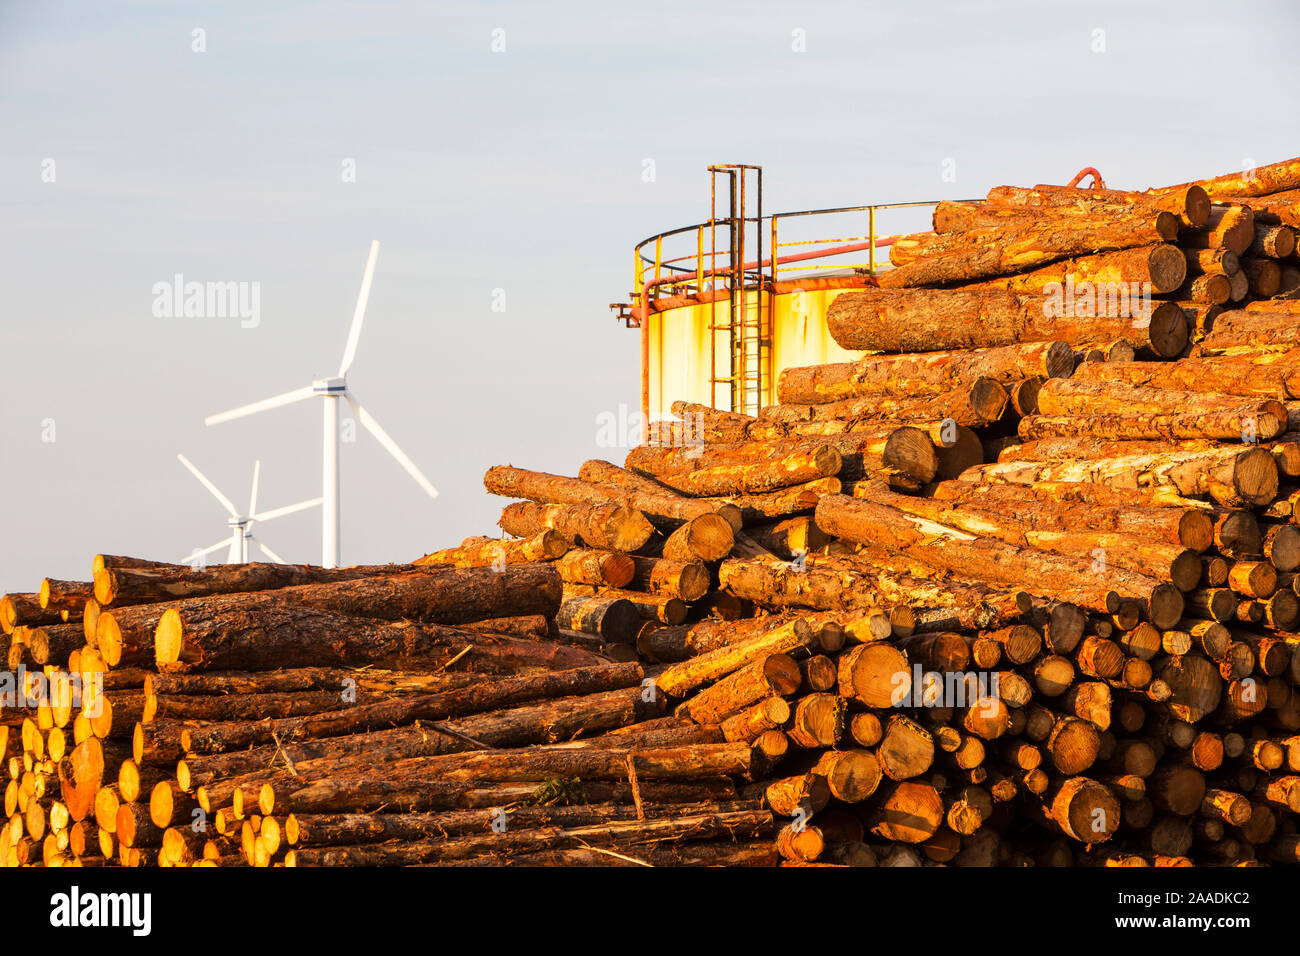 Logs bound for a biofuel power station in Workington next to oil tanks in Workington port, Cumbria, UK, with a wind farm in the background. Stock Photo